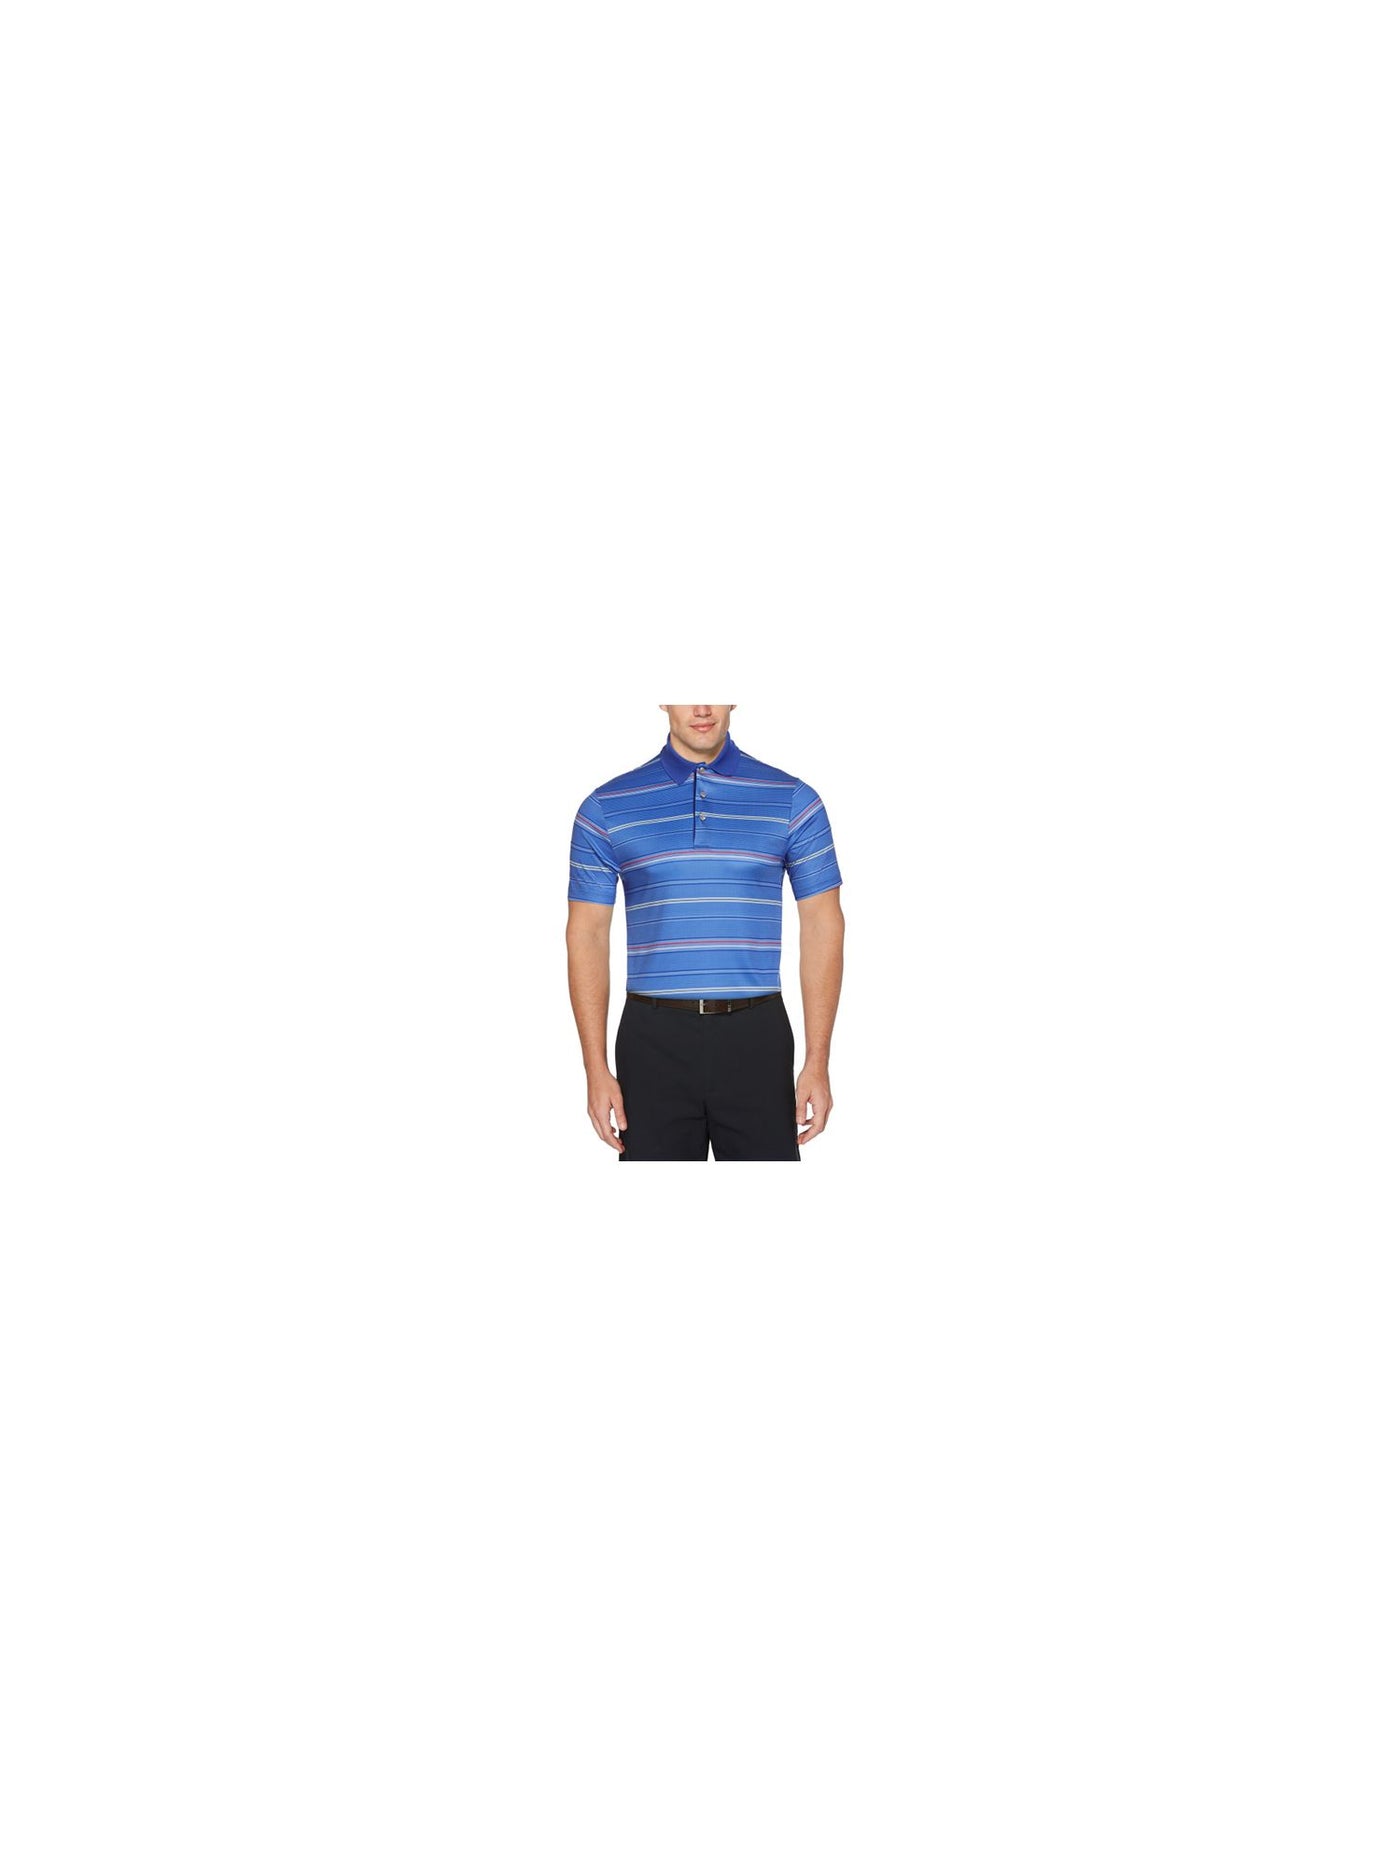 HYBRID APPAREL Mens Blue Lightweight, Striped Athletic Fit Moisture Wicking Polo S